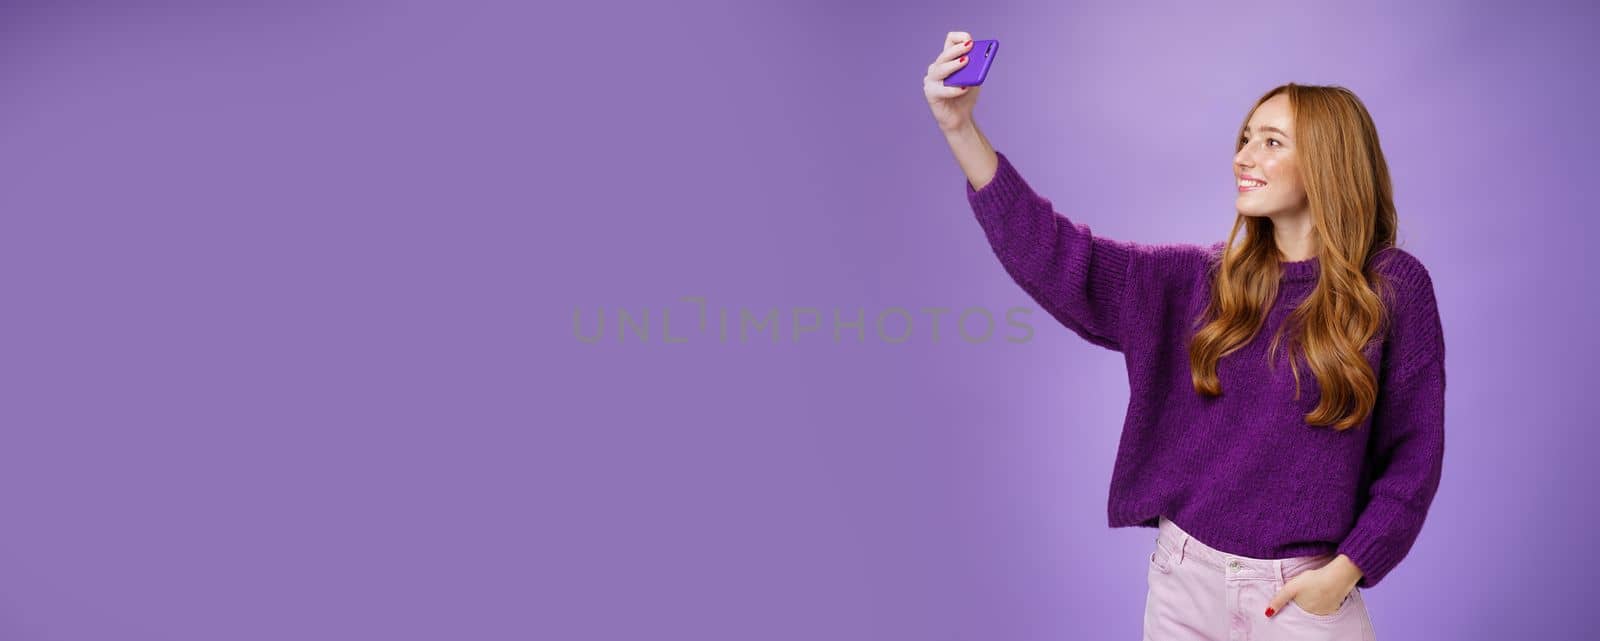 Attractive confident and stylish happy 20s woman with ginger hair standing carefree with joyful smile over purple background extending hand with smartphone as taking selfie happily. Technology and lifestyle concept